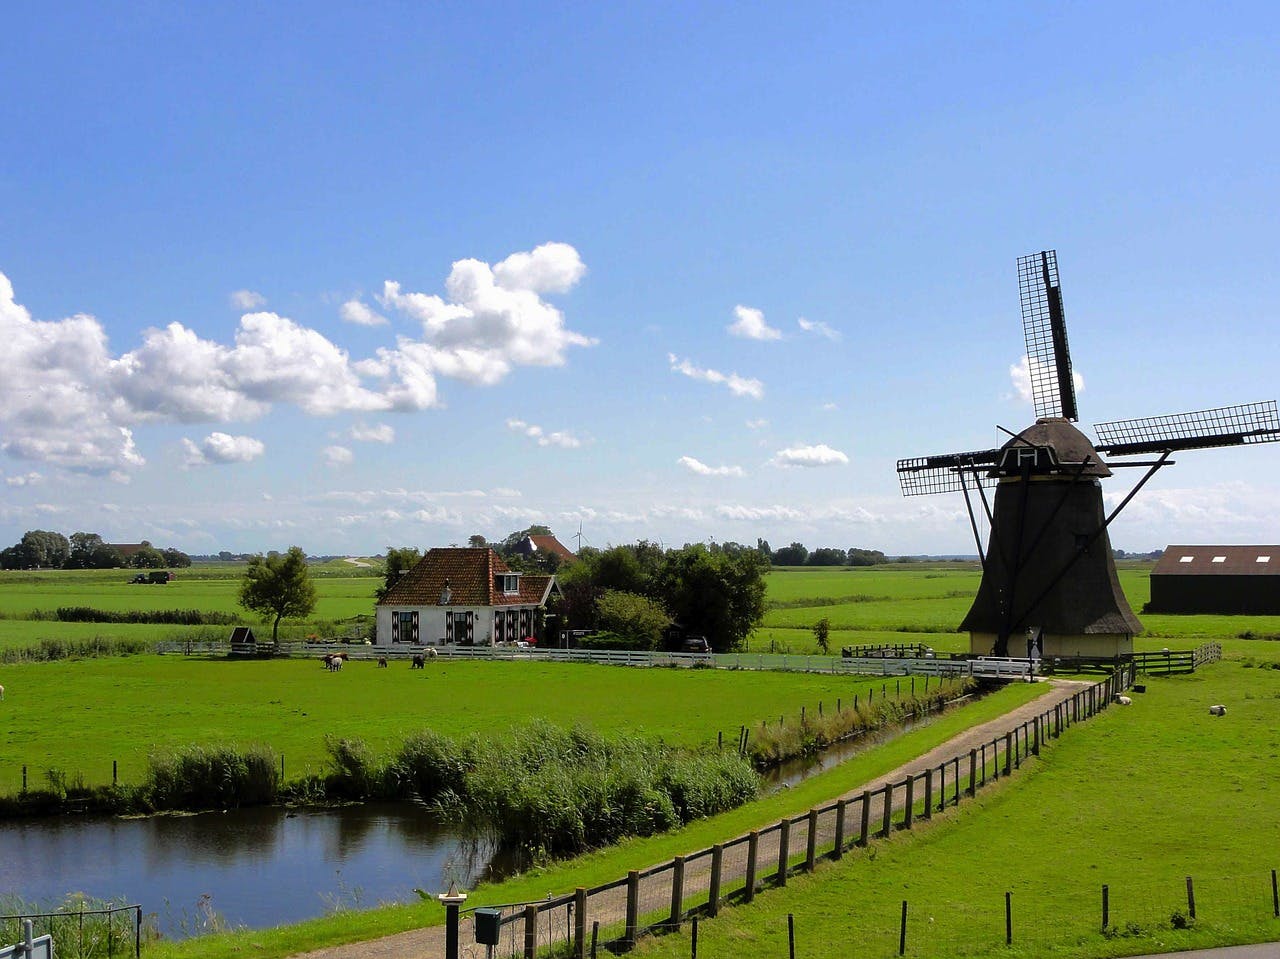 Campercontact country information - Mills in the Dutch landscape